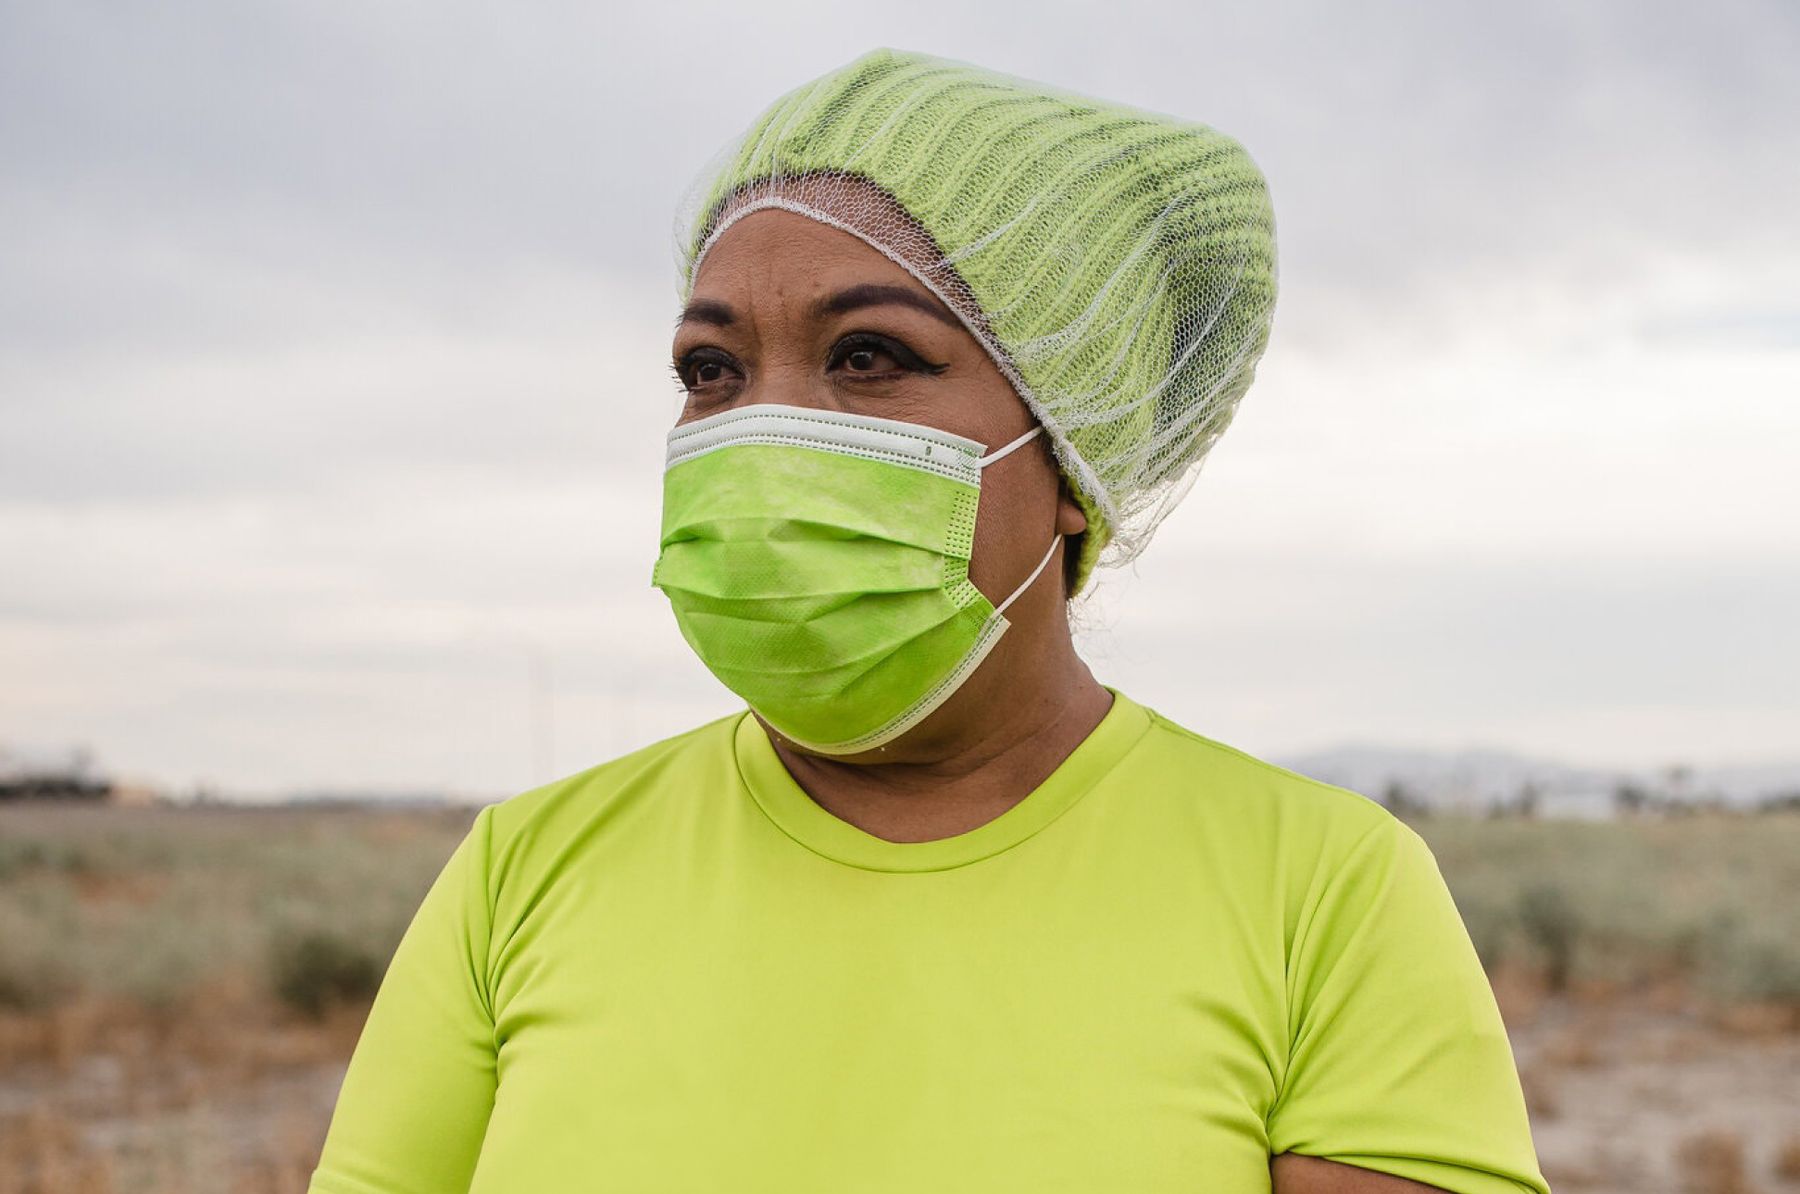 Woman wearing a yellow mask and a knit hat with a hairnet stands in front of a farm field and looks in the distance.